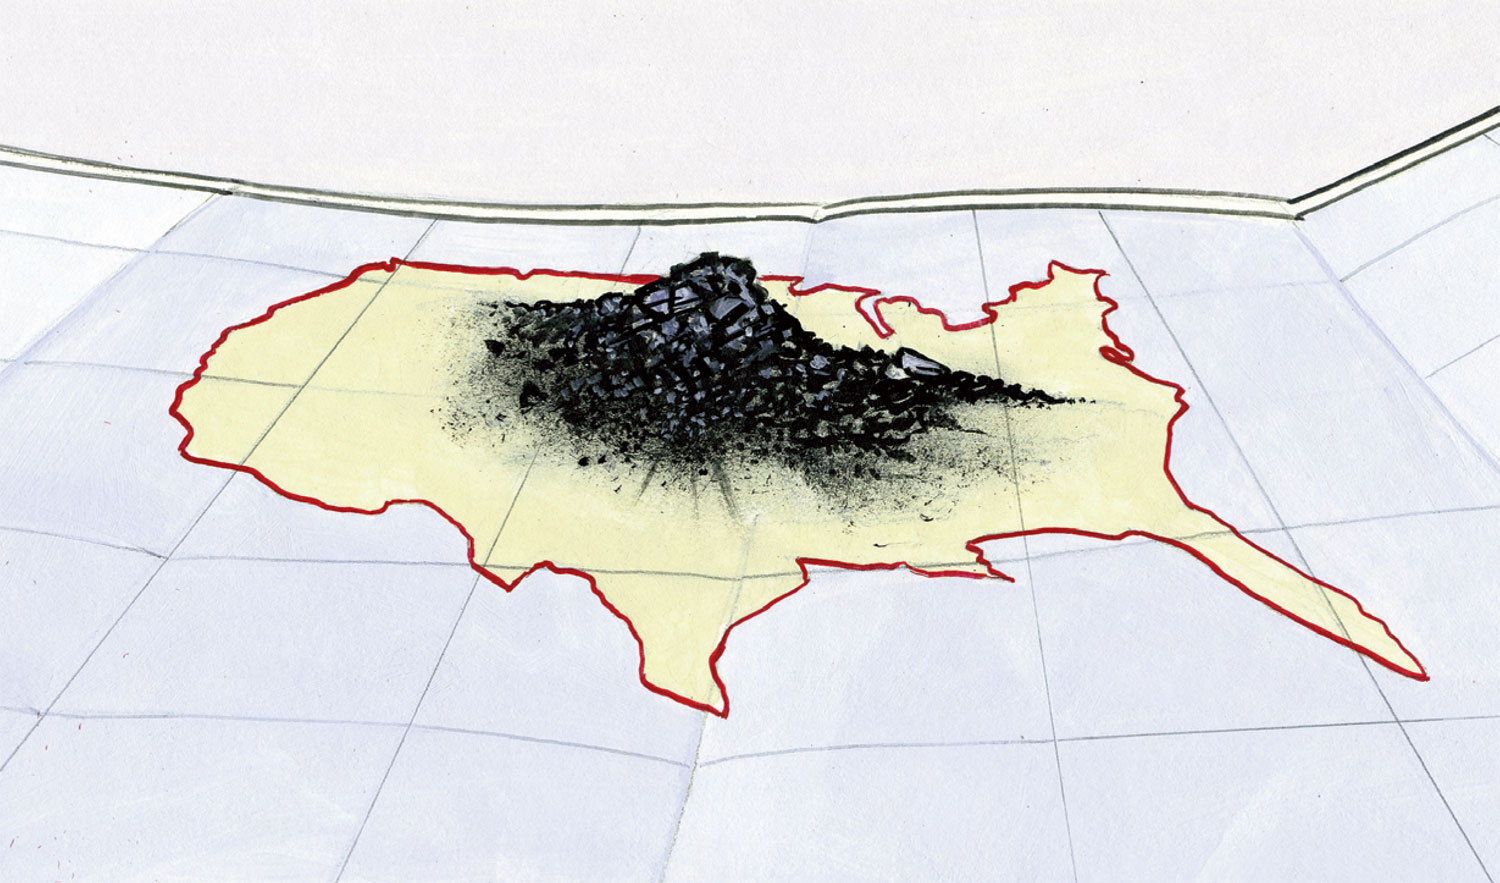 Illustration by Arthur E. Giron of a map of America with a pile of coal on top of it